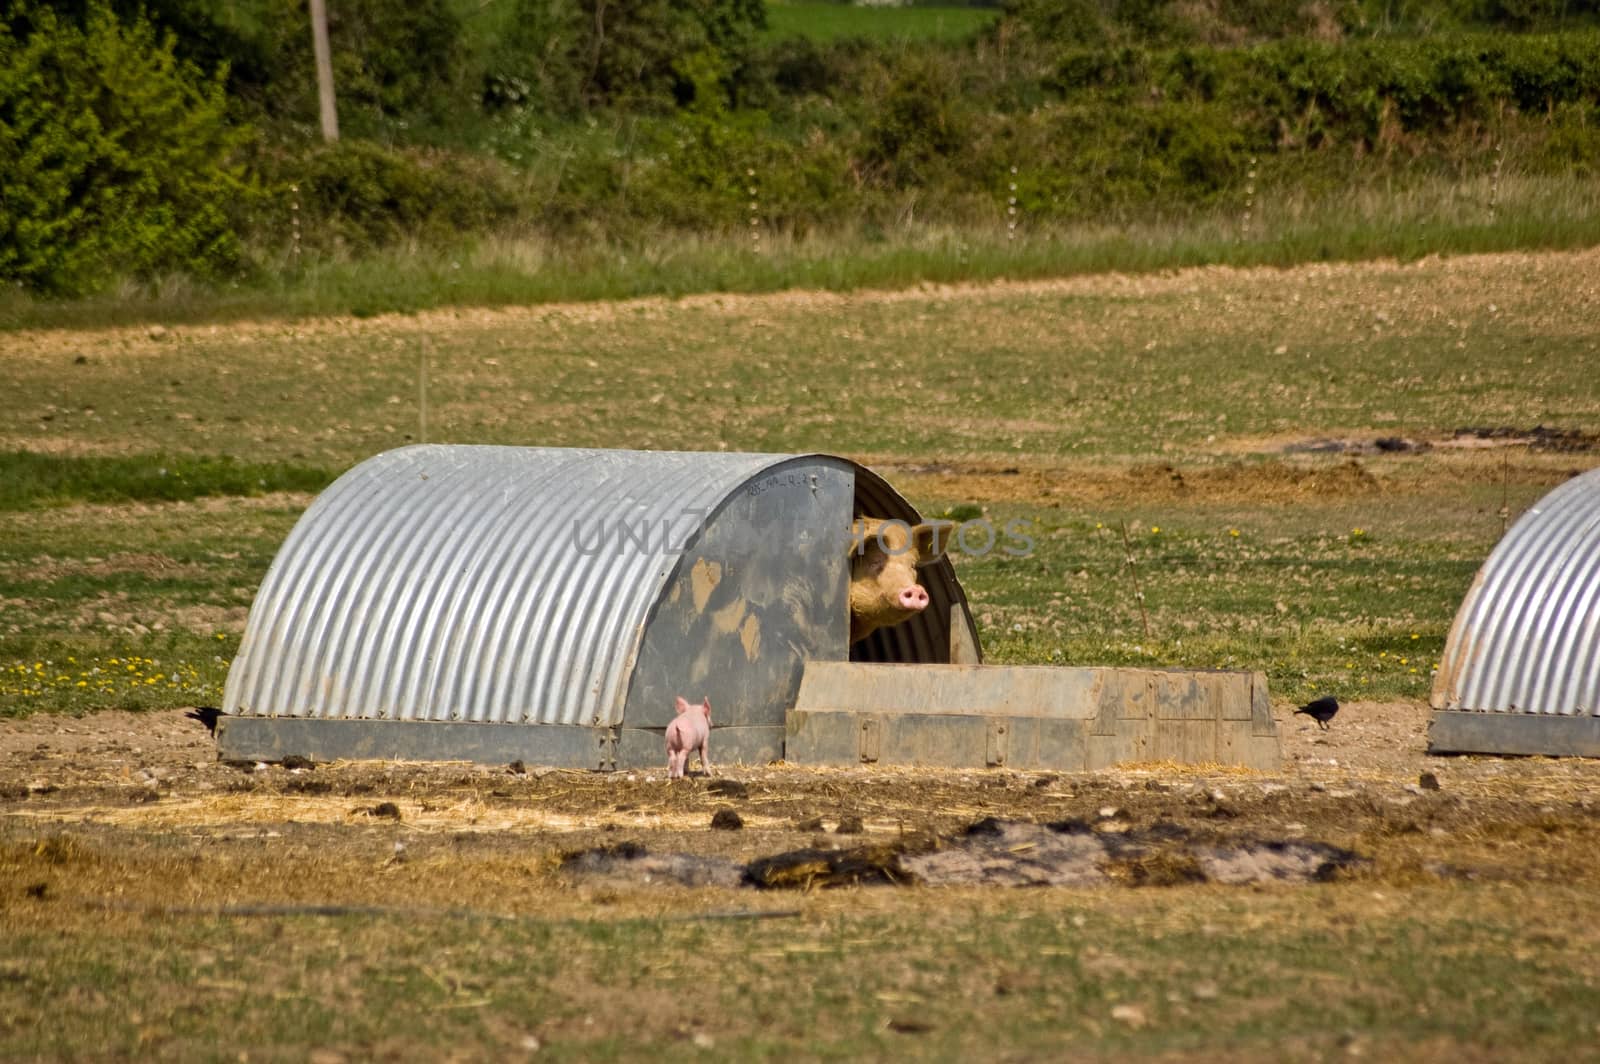 Piglet and mother at Pig Farm by BasPhoto